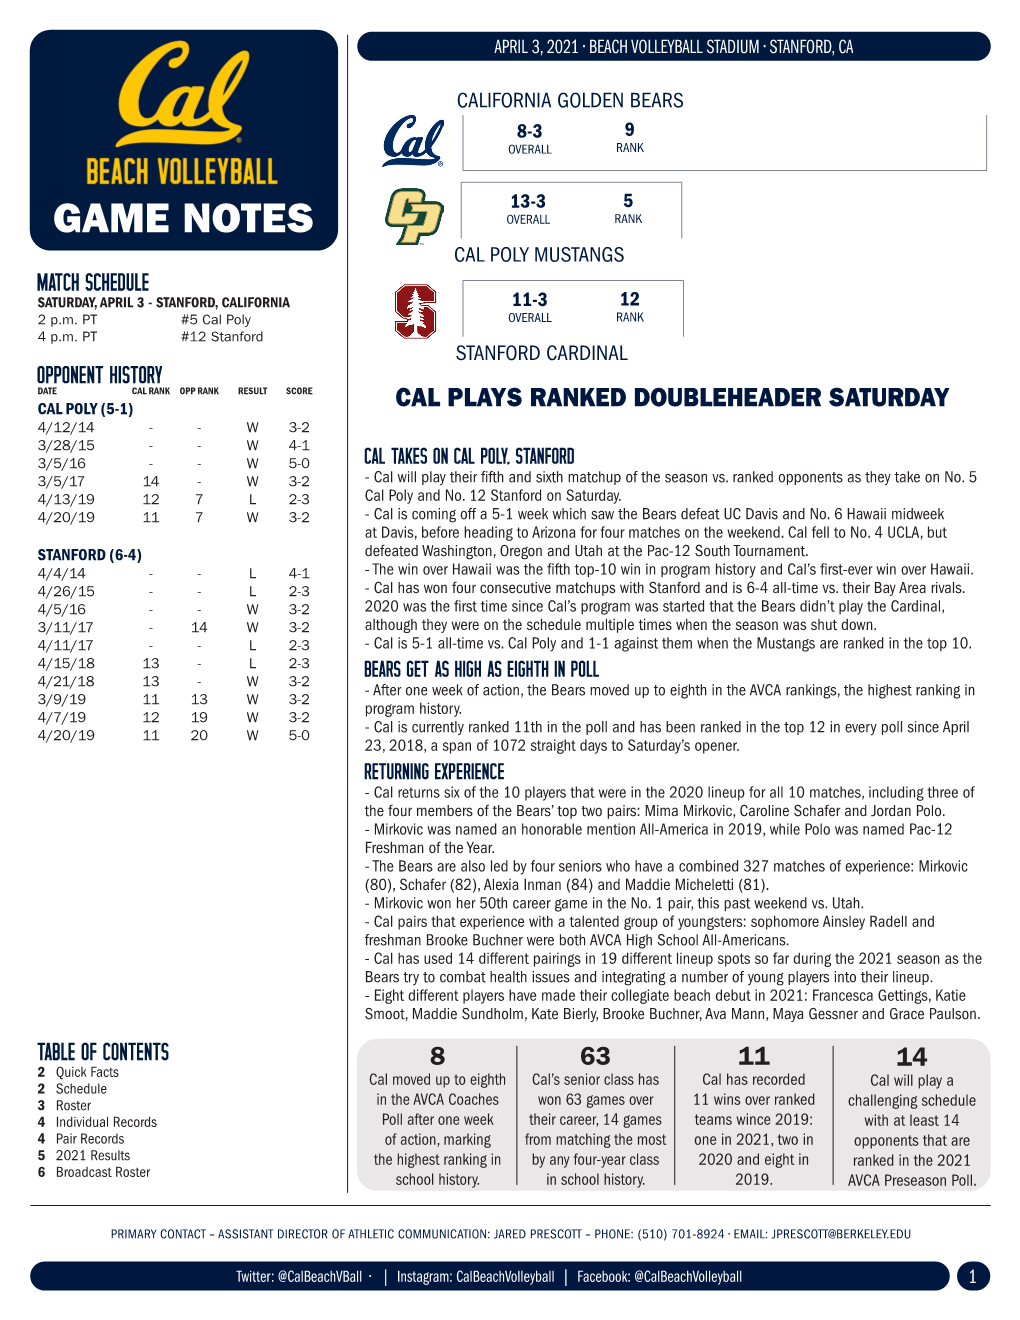 GAME NOTES OVERALL RANK CAL POLY MUSTANGS MATCH SCHEDULE SATURDAY, APRIL 3 - STANFORD, CALIFORNIA 11-3 12 2 P.M